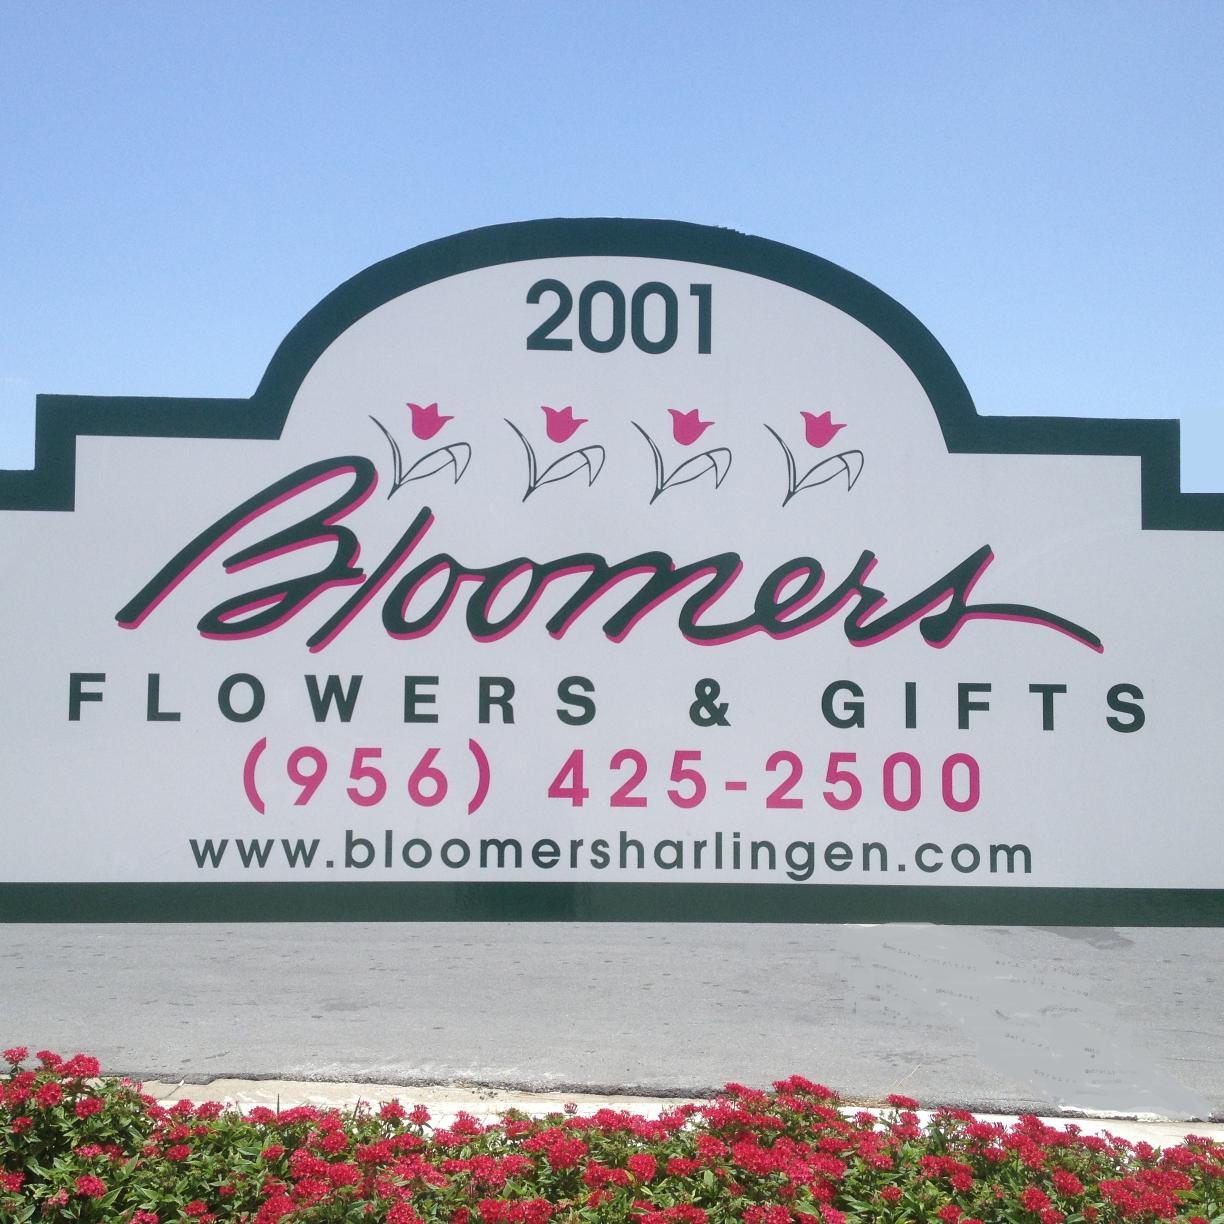 Your #1 Florist in Harlingen for fresh, high-quality flowers. Our professional staff will work with you to create beautiful gifts for your special occasions.